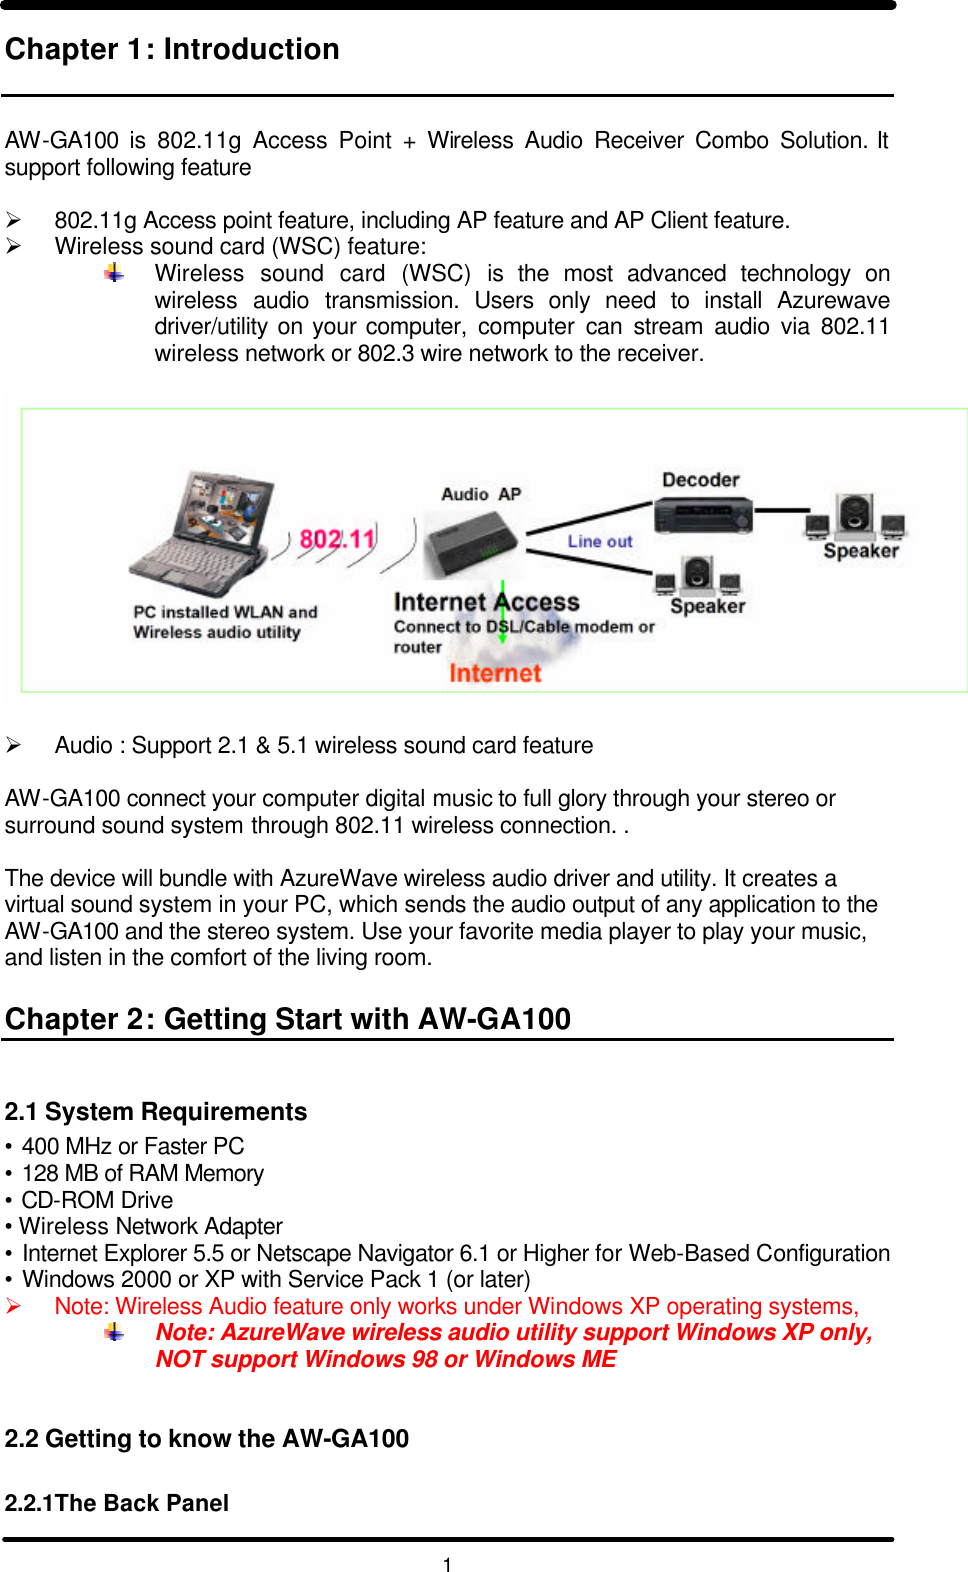   1 Chapter 1: Introduction   AW-GA100 is 802.11g Access Point + Wireless Audio Receiver Combo Solution. It support following feature  Ø 802.11g Access point feature, including AP feature and AP Client feature. Ø Wireless sound card (WSC) feature:   Wireless sound card (WSC) is the most advanced technology on wireless audio transmission. Users only need to install Azurewave driver/utility on your computer,  computer can stream audio via 802.11 wireless network or 802.3 wire network to the receiver.     Ø Audio : Support 2.1 &amp; 5.1 wireless sound card feature   AW-GA100 connect your computer digital music to full glory through your stereo or surround sound system through 802.11 wireless connection. .  The device will bundle with AzureWave wireless audio driver and utility. It creates a virtual sound system in your PC, which sends the audio output of any application to the AW-GA100 and the stereo system. Use your favorite media player to play your music, and listen in the comfort of the living room.  Chapter 2: Getting Start with AW-GA100  2.1 System Requirements • 400 MHz or Faster PC • 128 MB of RAM Memory • CD-ROM Drive •  Wireless Network Adapter • Internet Explorer 5.5 or Netscape Navigator 6.1 or Higher for Web-Based Configuration • Windows 2000 or XP with Service Pack 1 (or later) Ø Note: Wireless Audio feature only works under Windows XP operating systems,   Note: AzureWave wireless audio utility support Windows XP only, NOT support Windows 98 or Windows ME   2.2 Getting to know the AW-GA100  2.2.1The Back Panel 